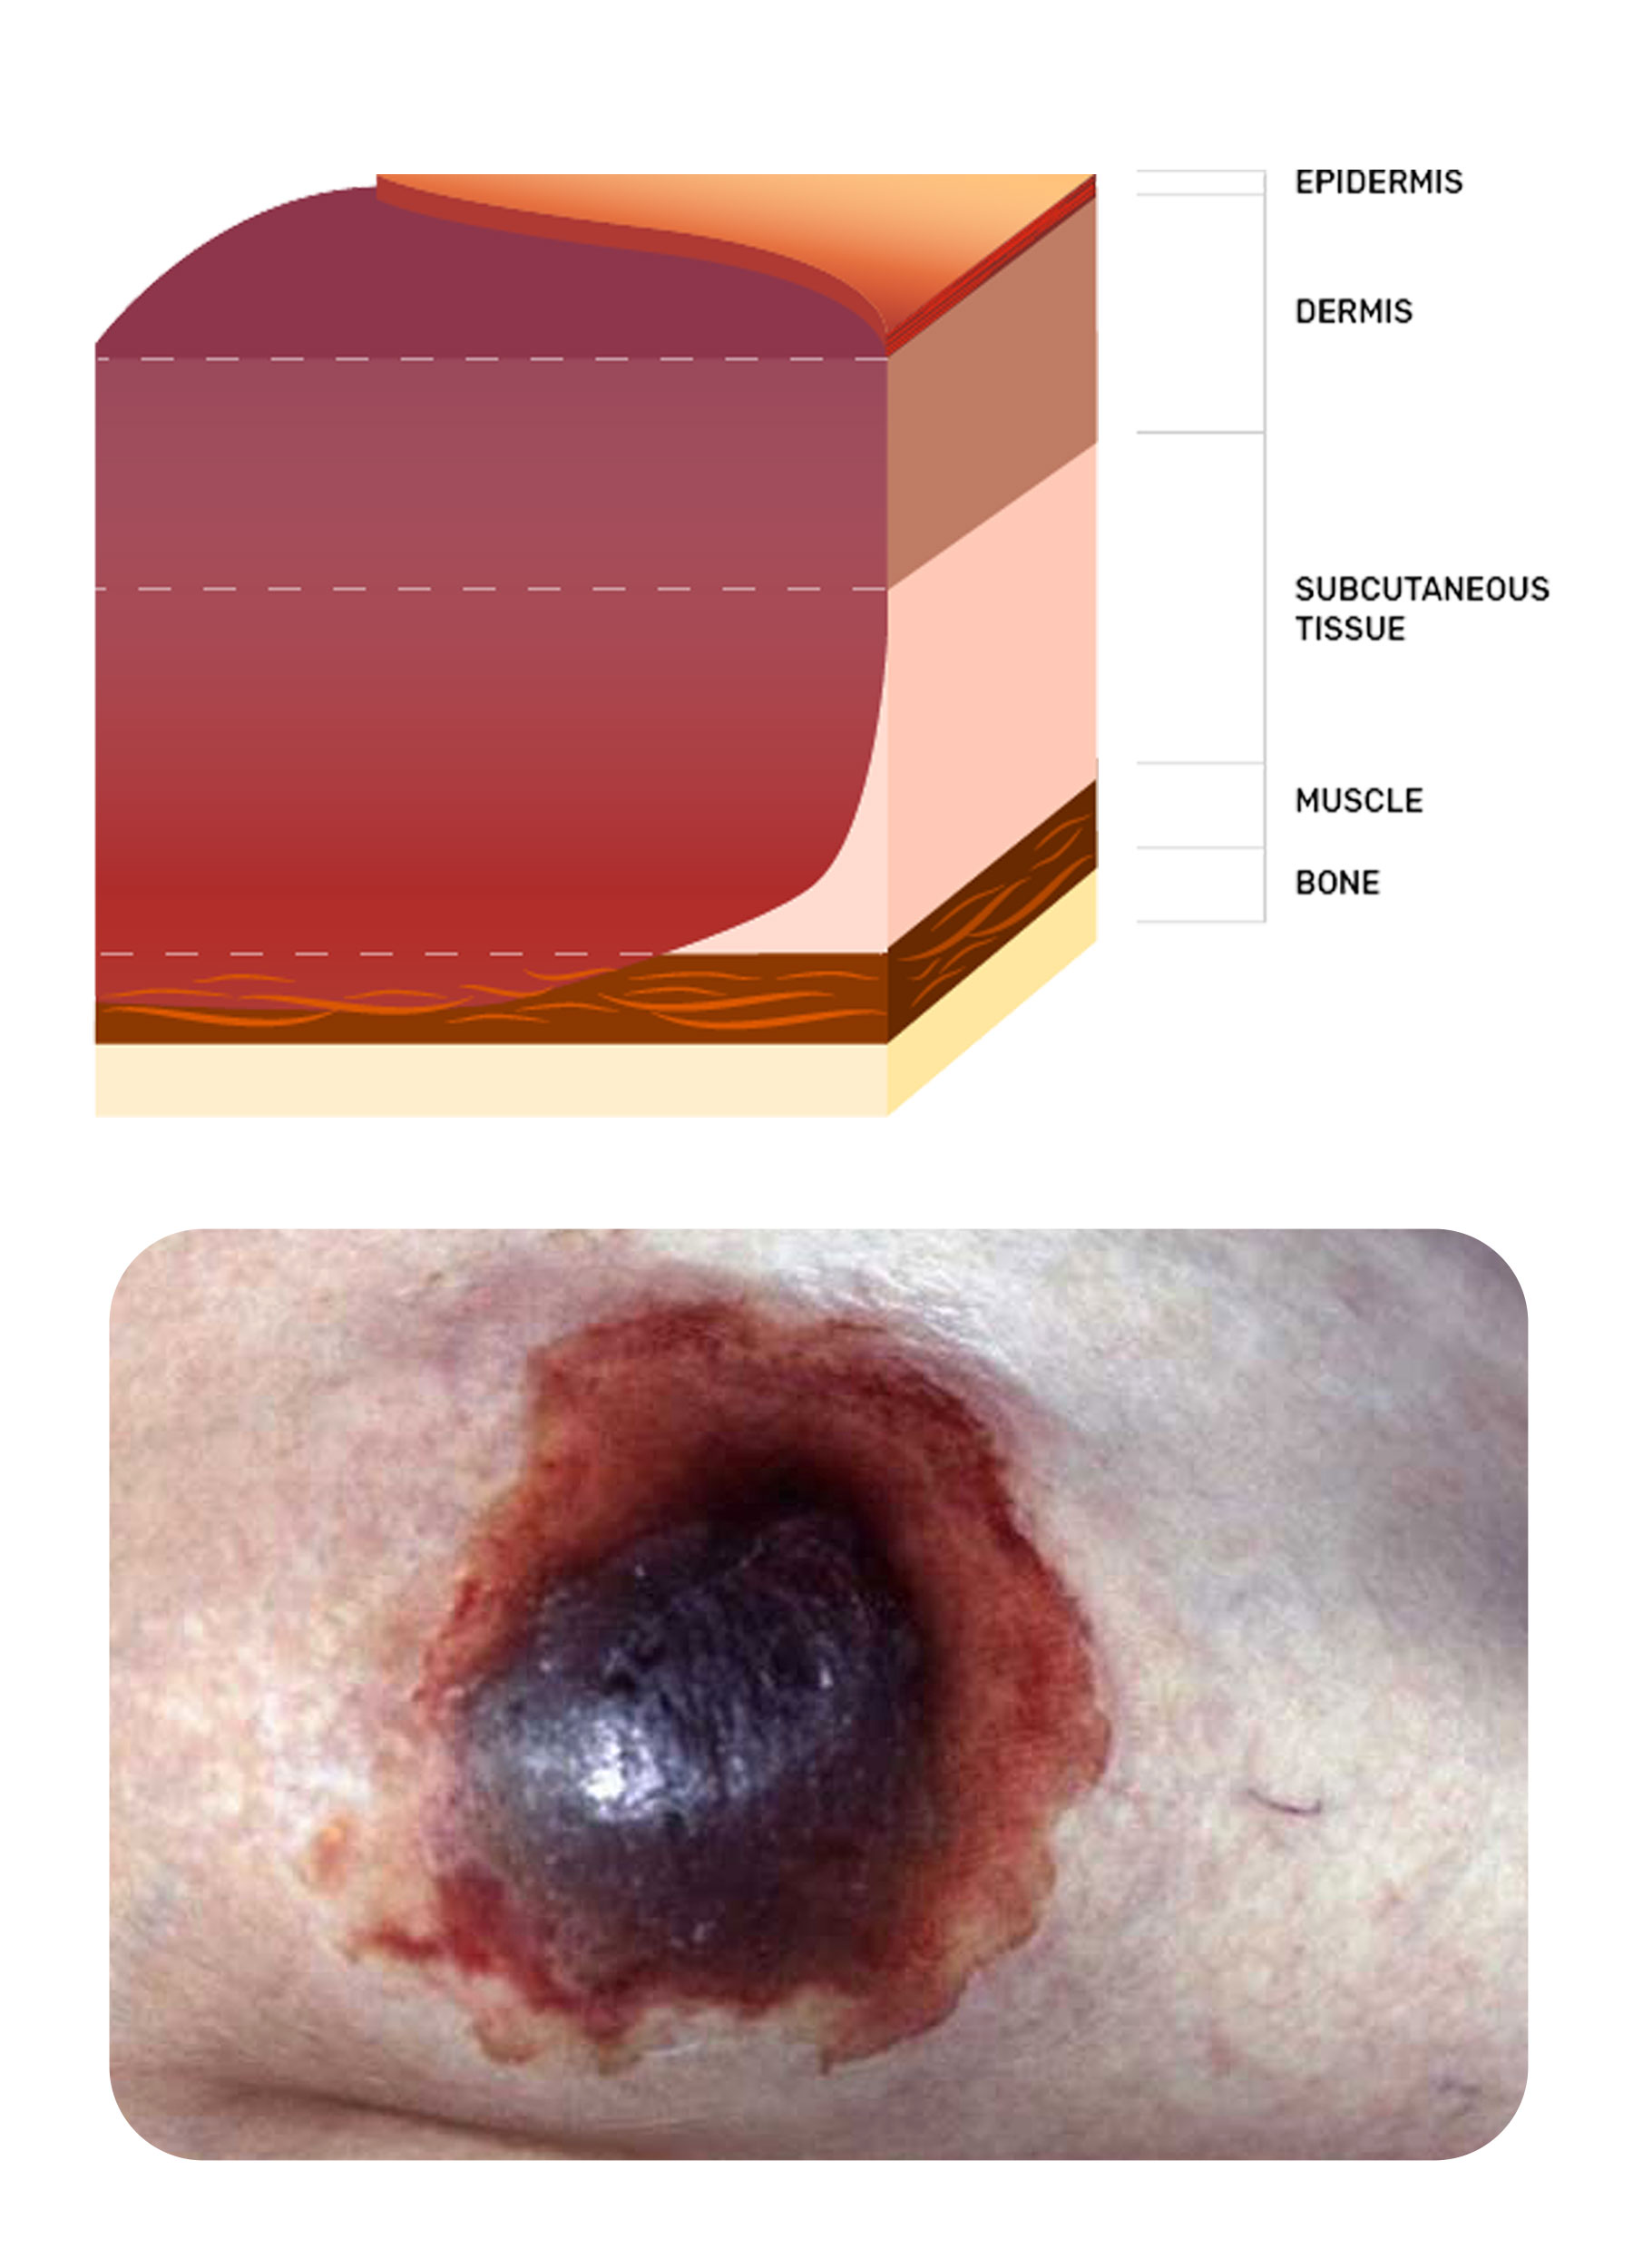 What is an example of a pressure wound?